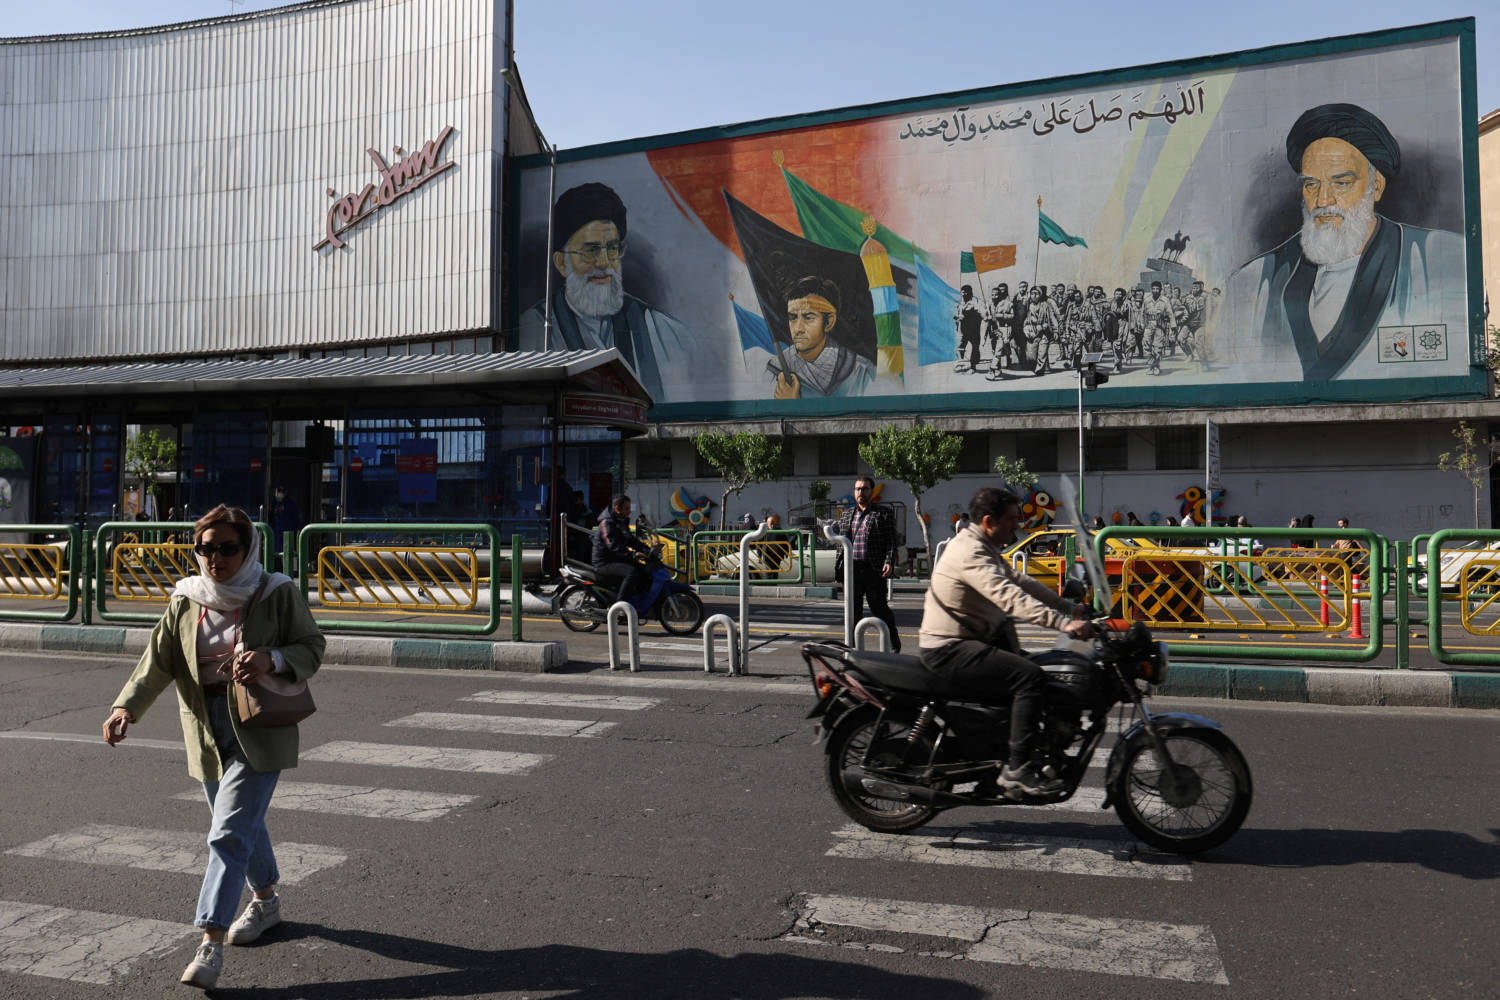 A Mural Depicting The Late Leader Of The Islamic Revolution Ayatollah Ruhollah Khomeini And Iran's Supreme Leader Ayatollah Ali Khamenei Is Seen On A Building In A Street